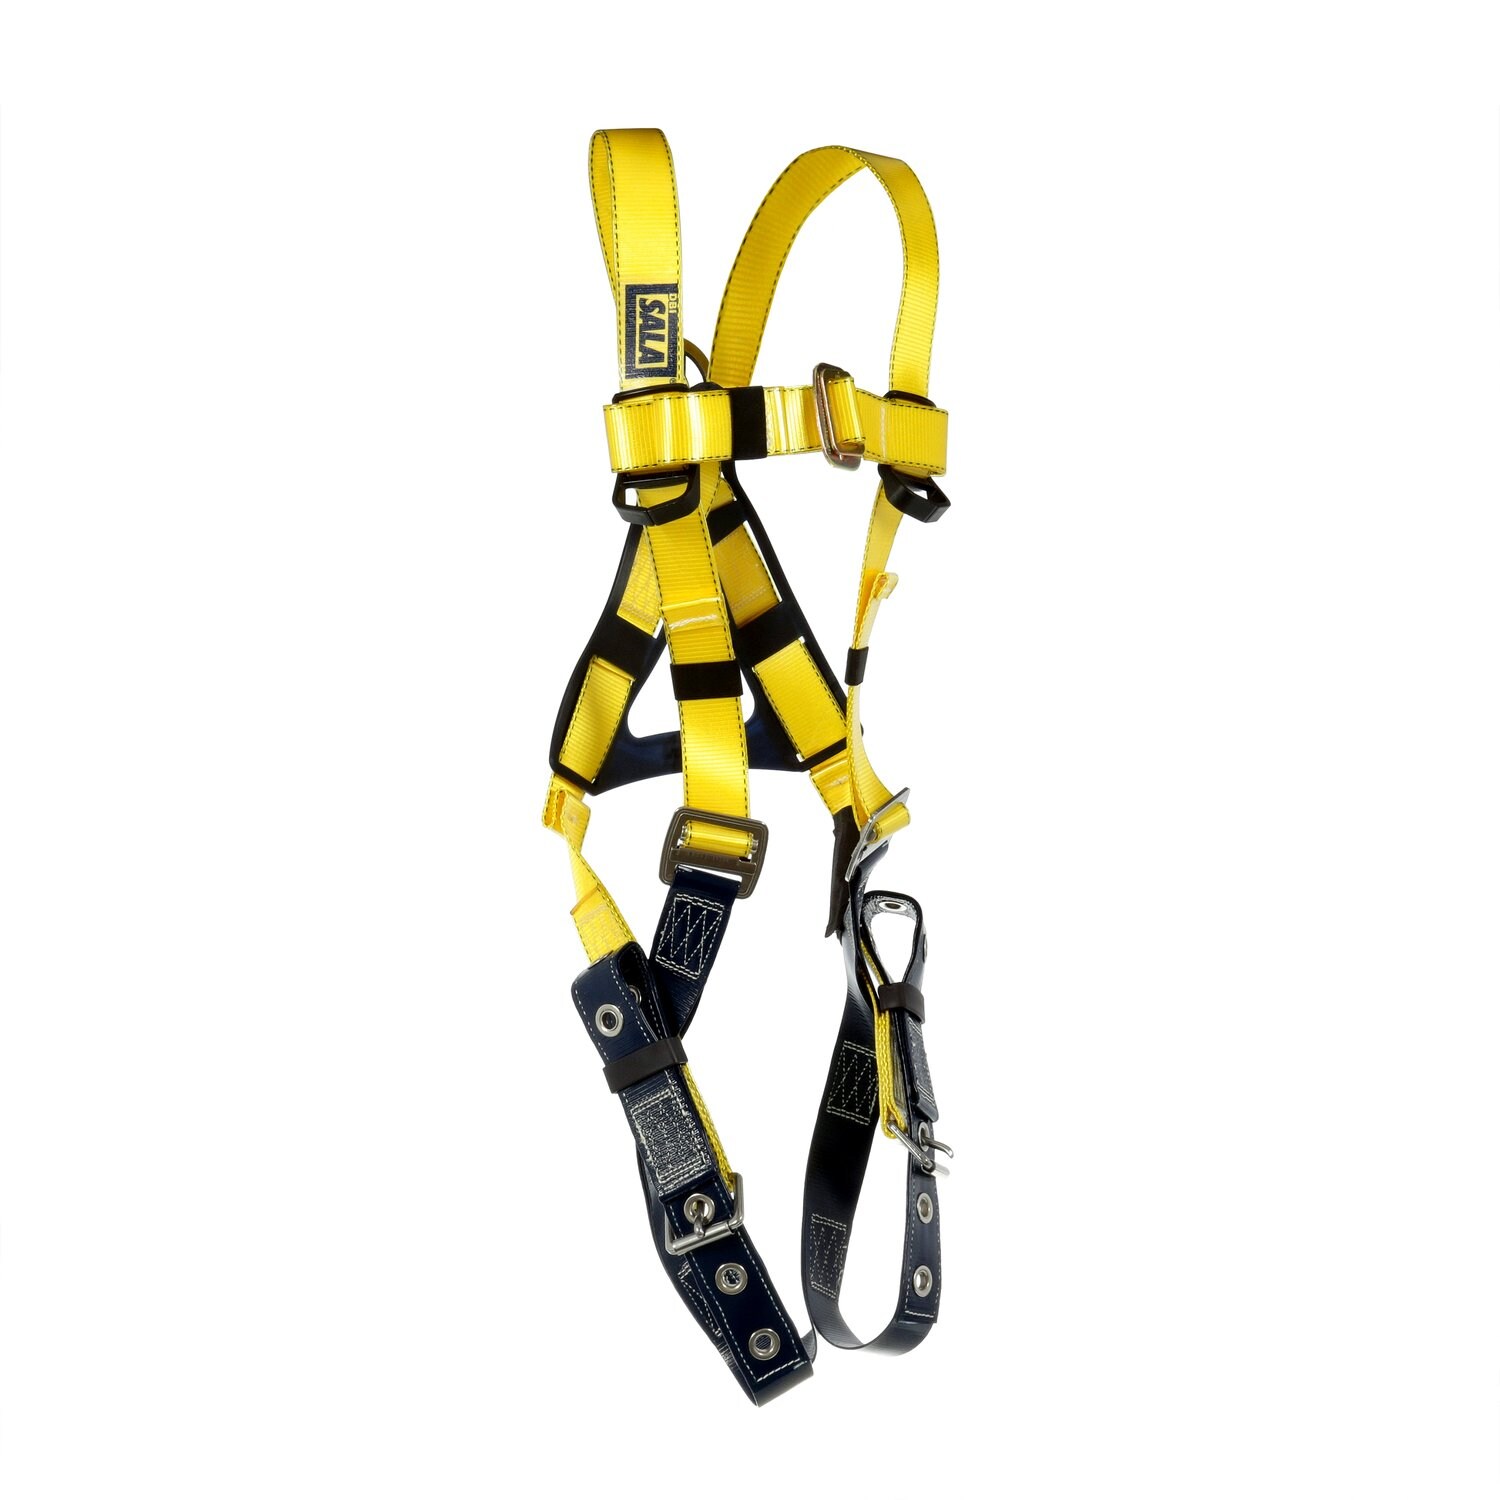 7012816462 - 3M DBI-SALA Delta Vest Safety Harness with SRL Connector 1114107, Stainless Steel Hardware, Small